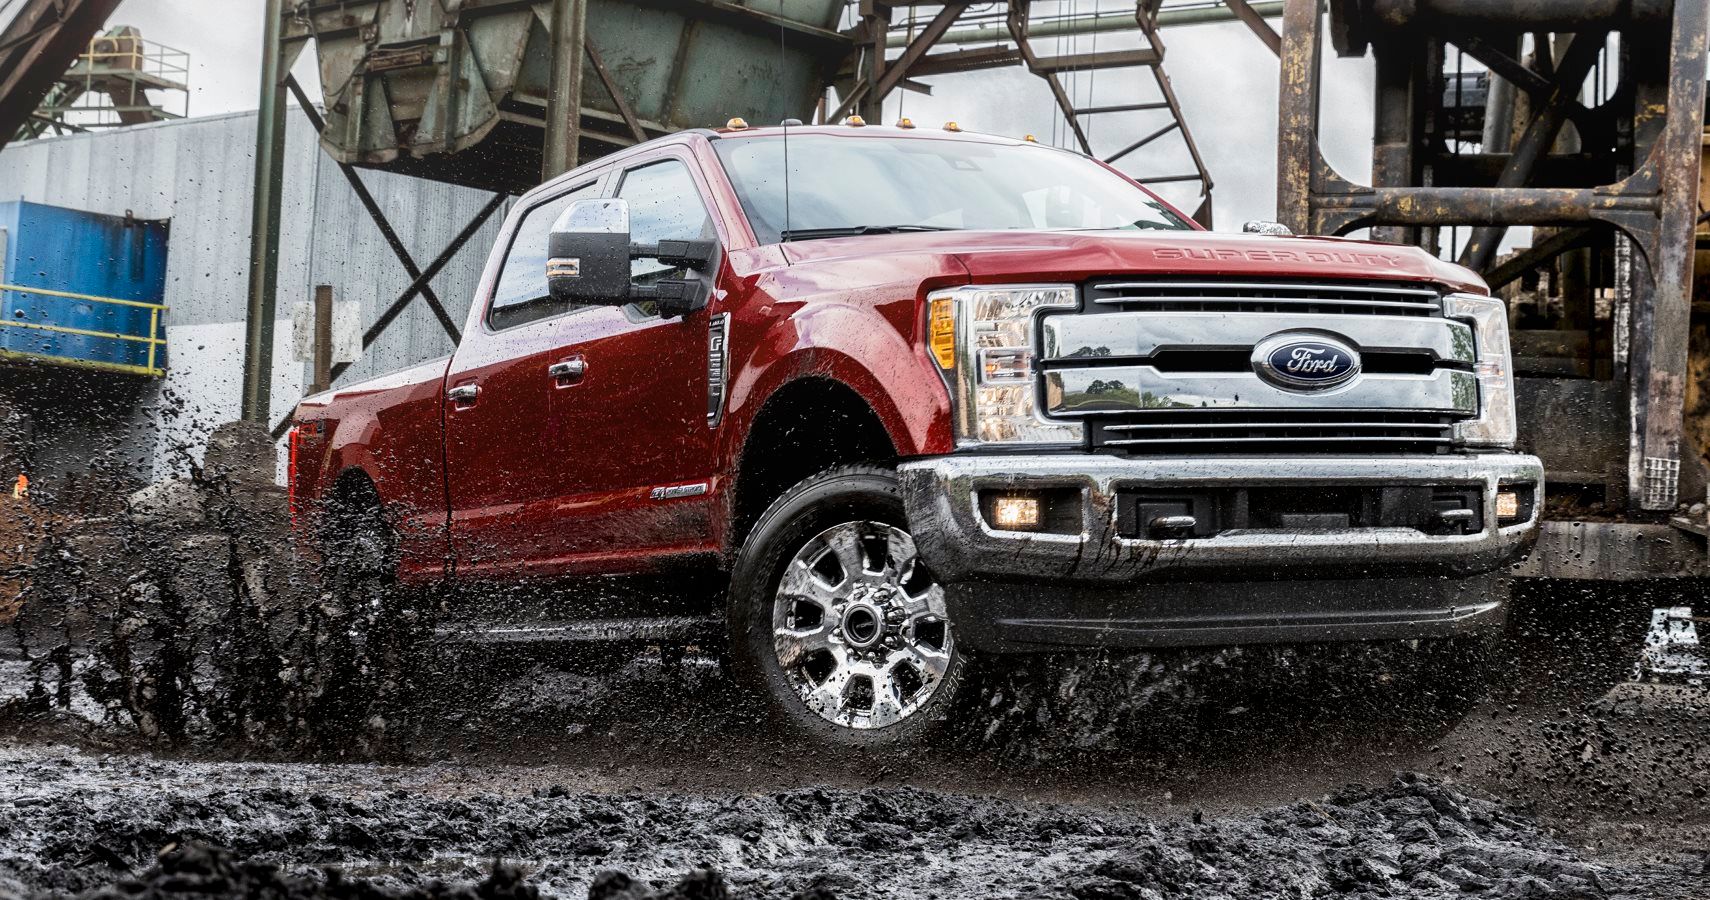 Review: Ford F-250 Super Duty - Power And Toughness